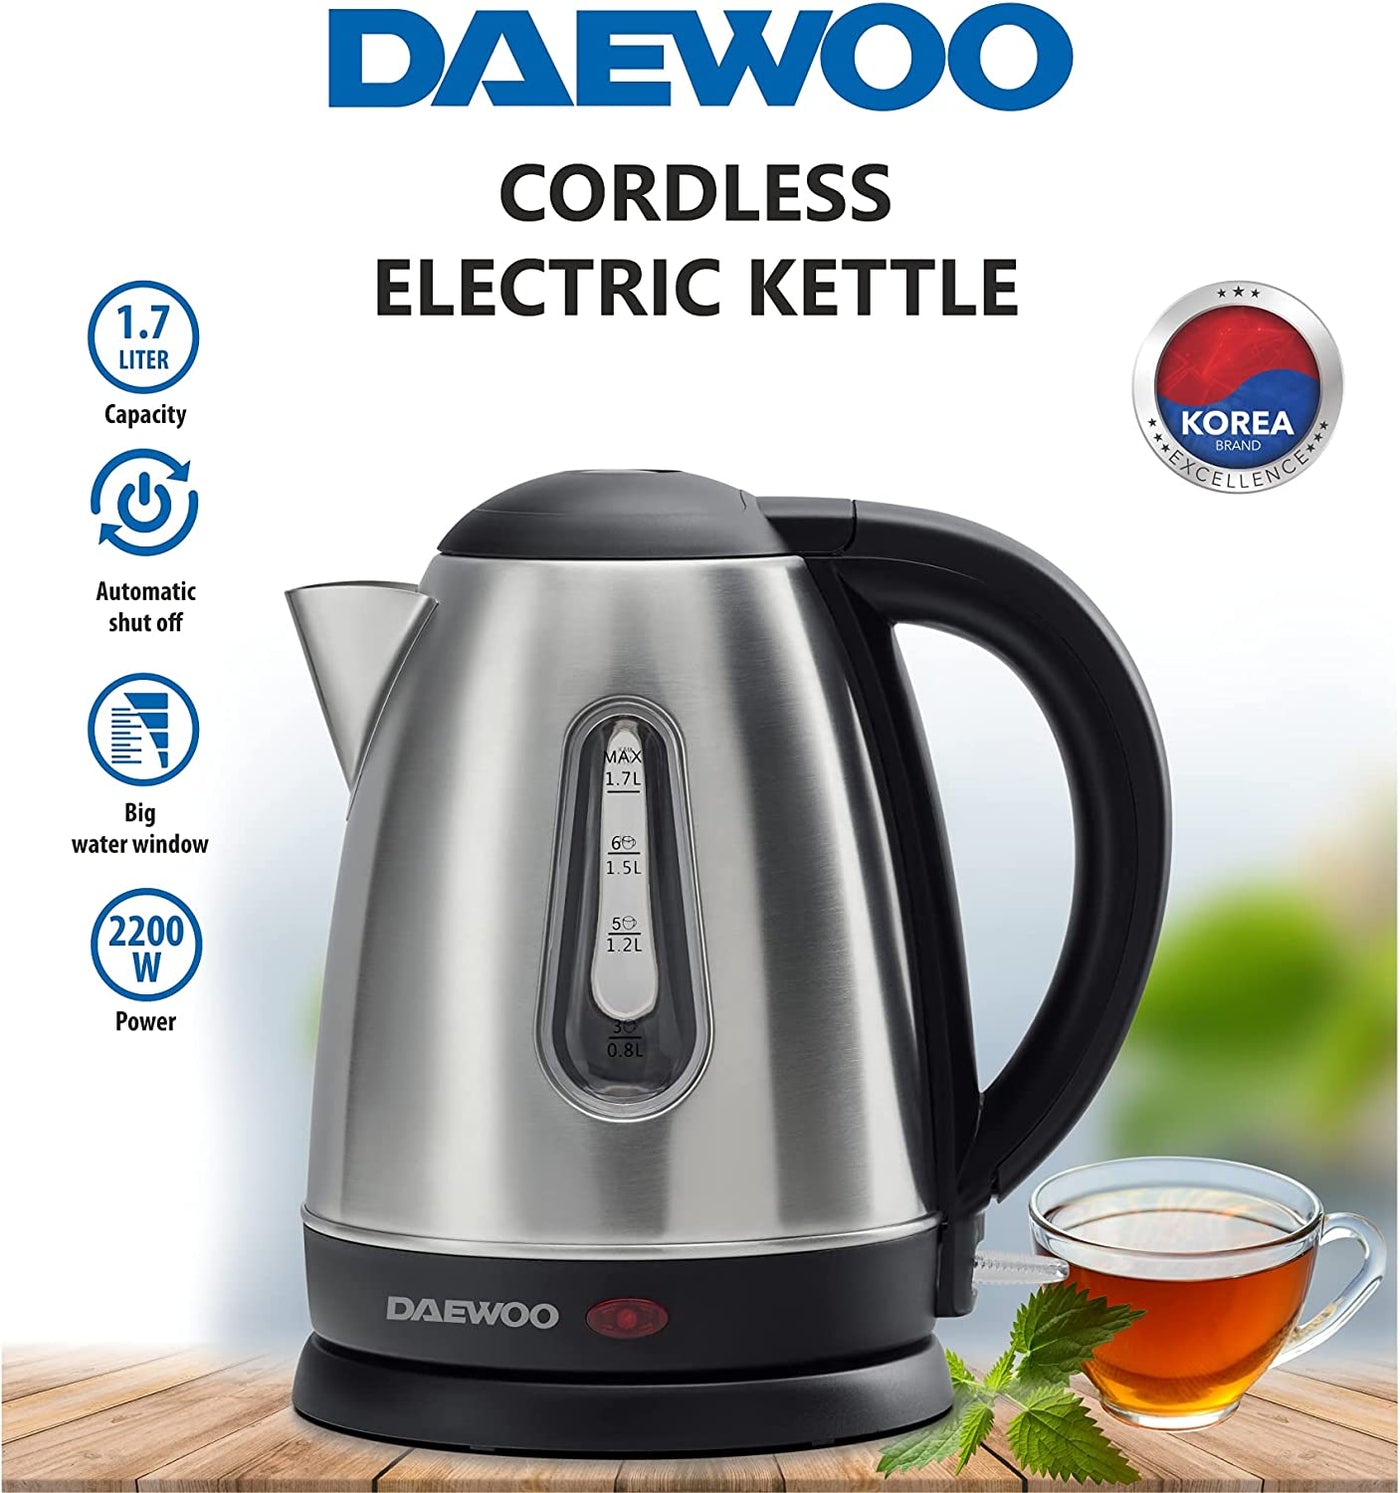 Bundle Set of Daewoo 2400W Steam Iron with Ceramic Soleplate + 1.7 Liter Stainless Steel Electric Kettle with Dual Water Window 2200W